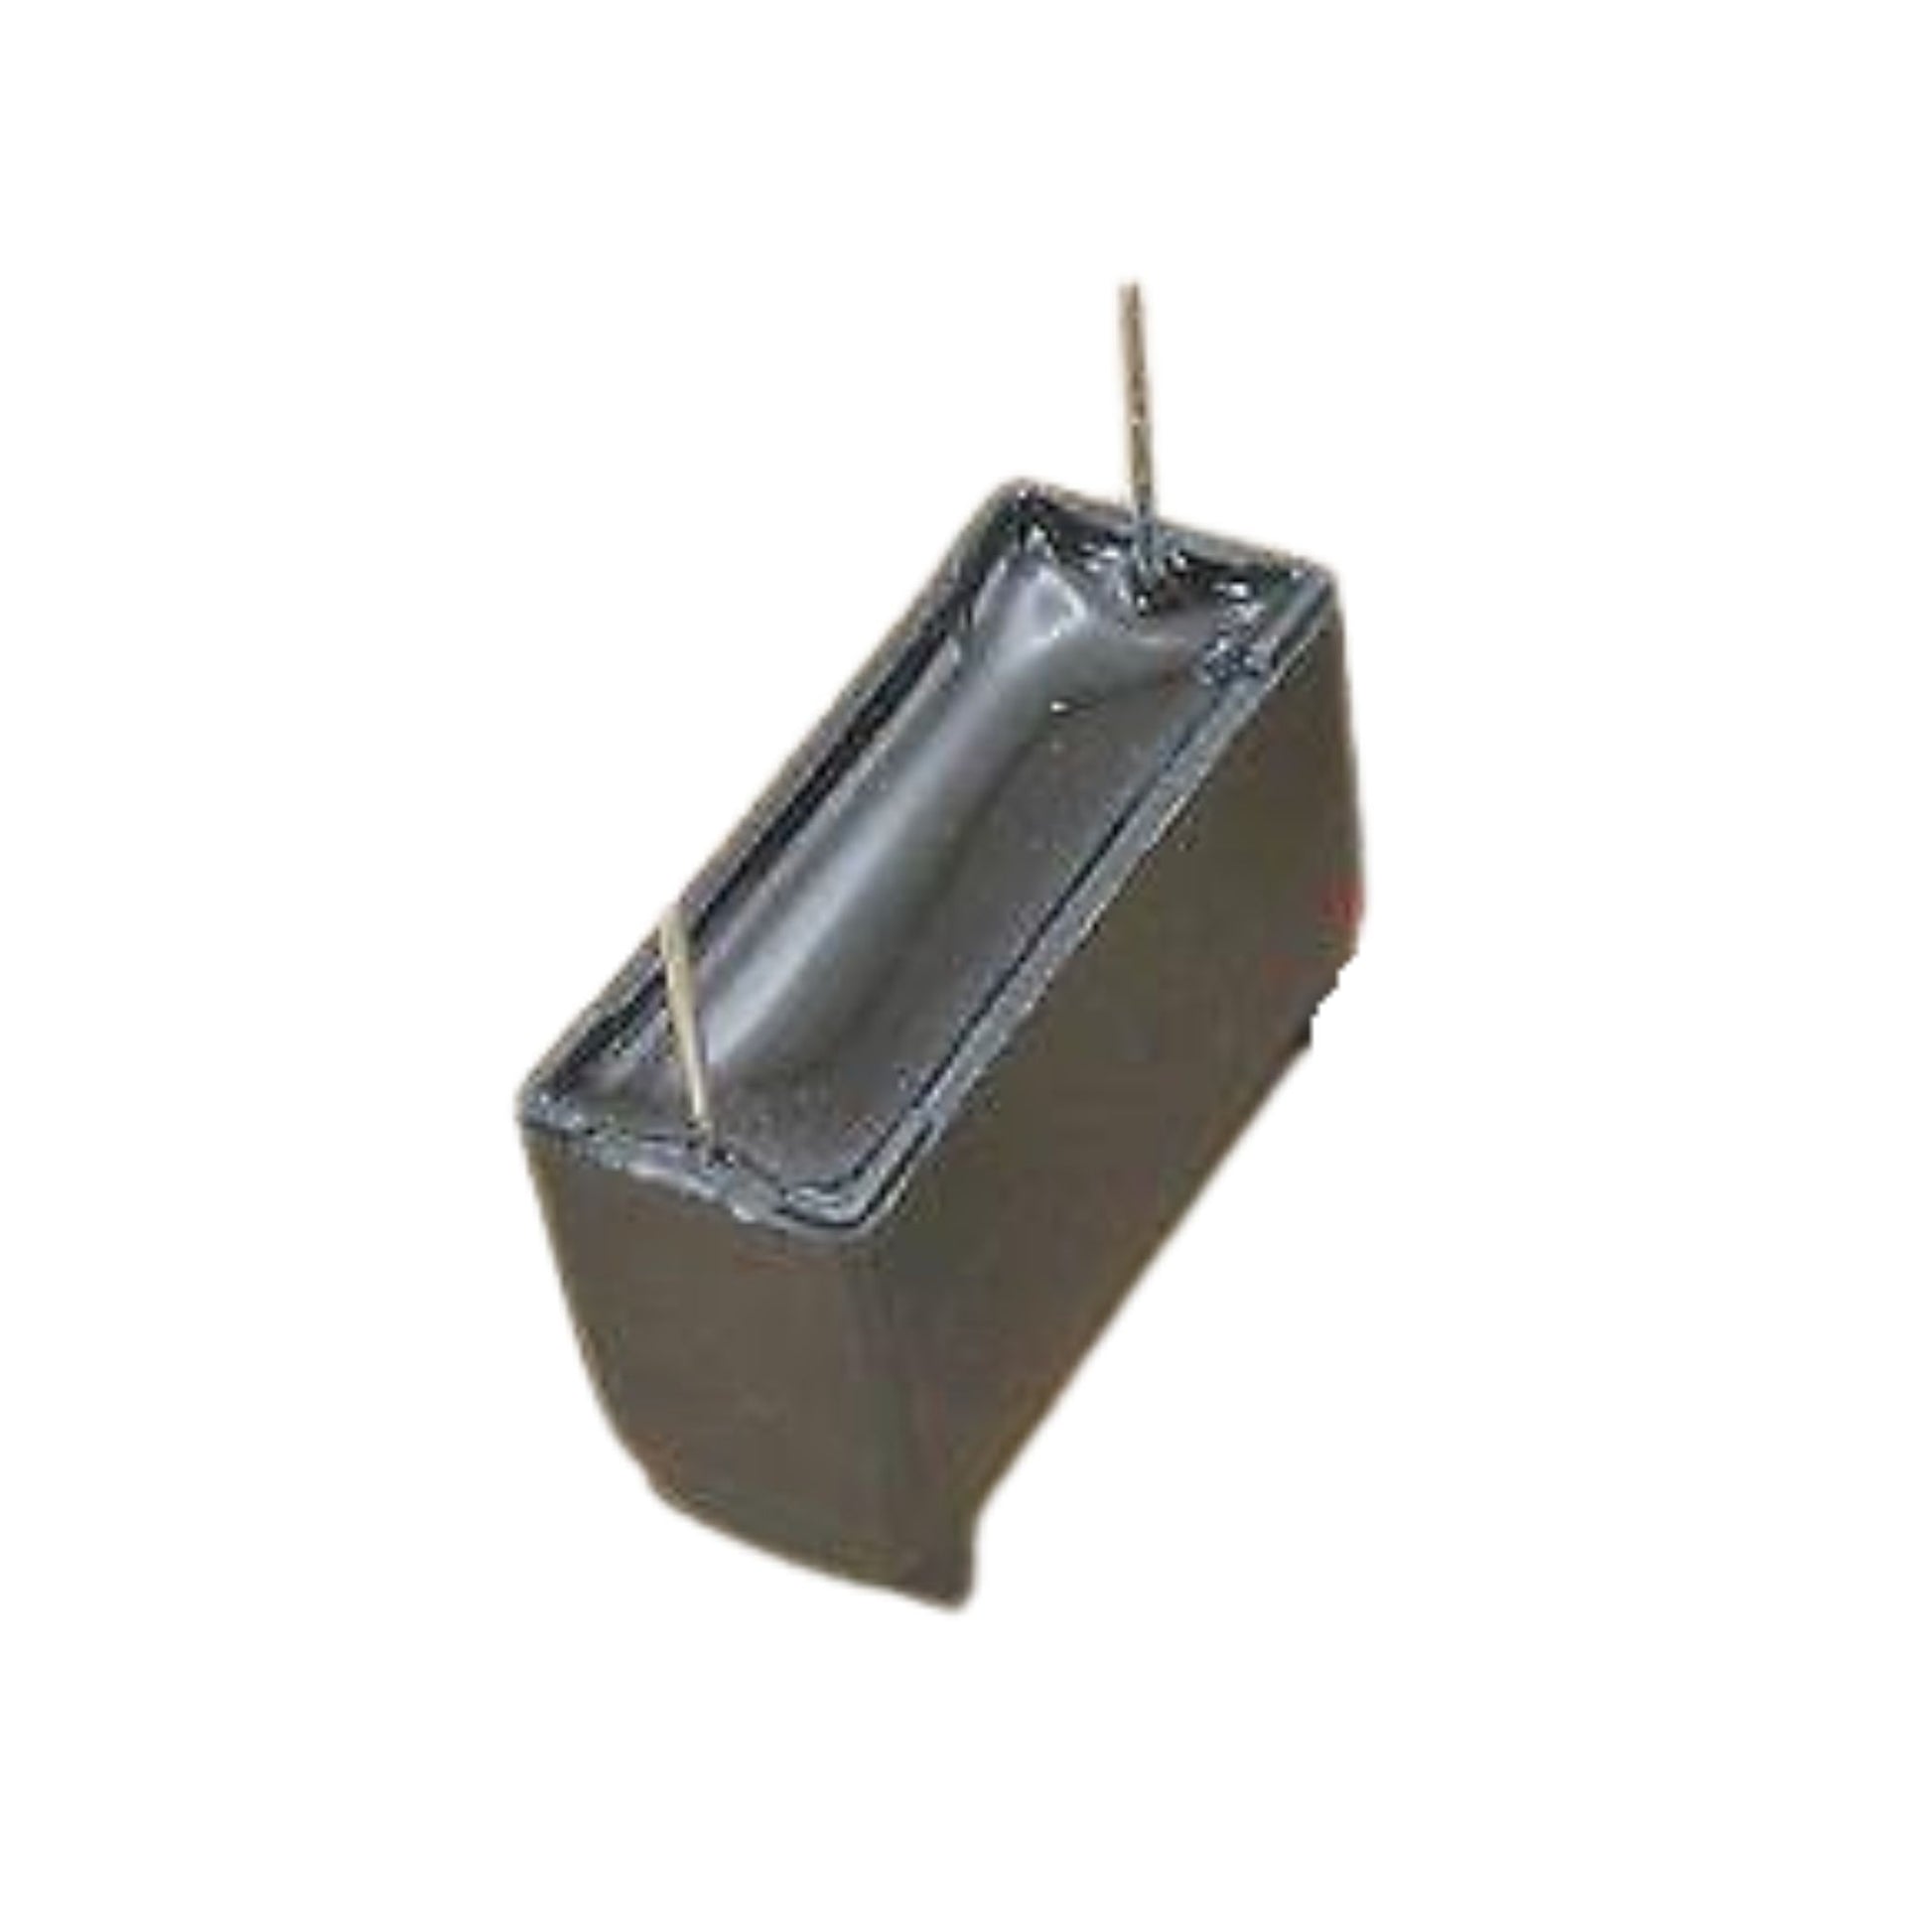 2 µF J MKP-X2 275Vac Capacitor suitable for Induction Stove - Faritha